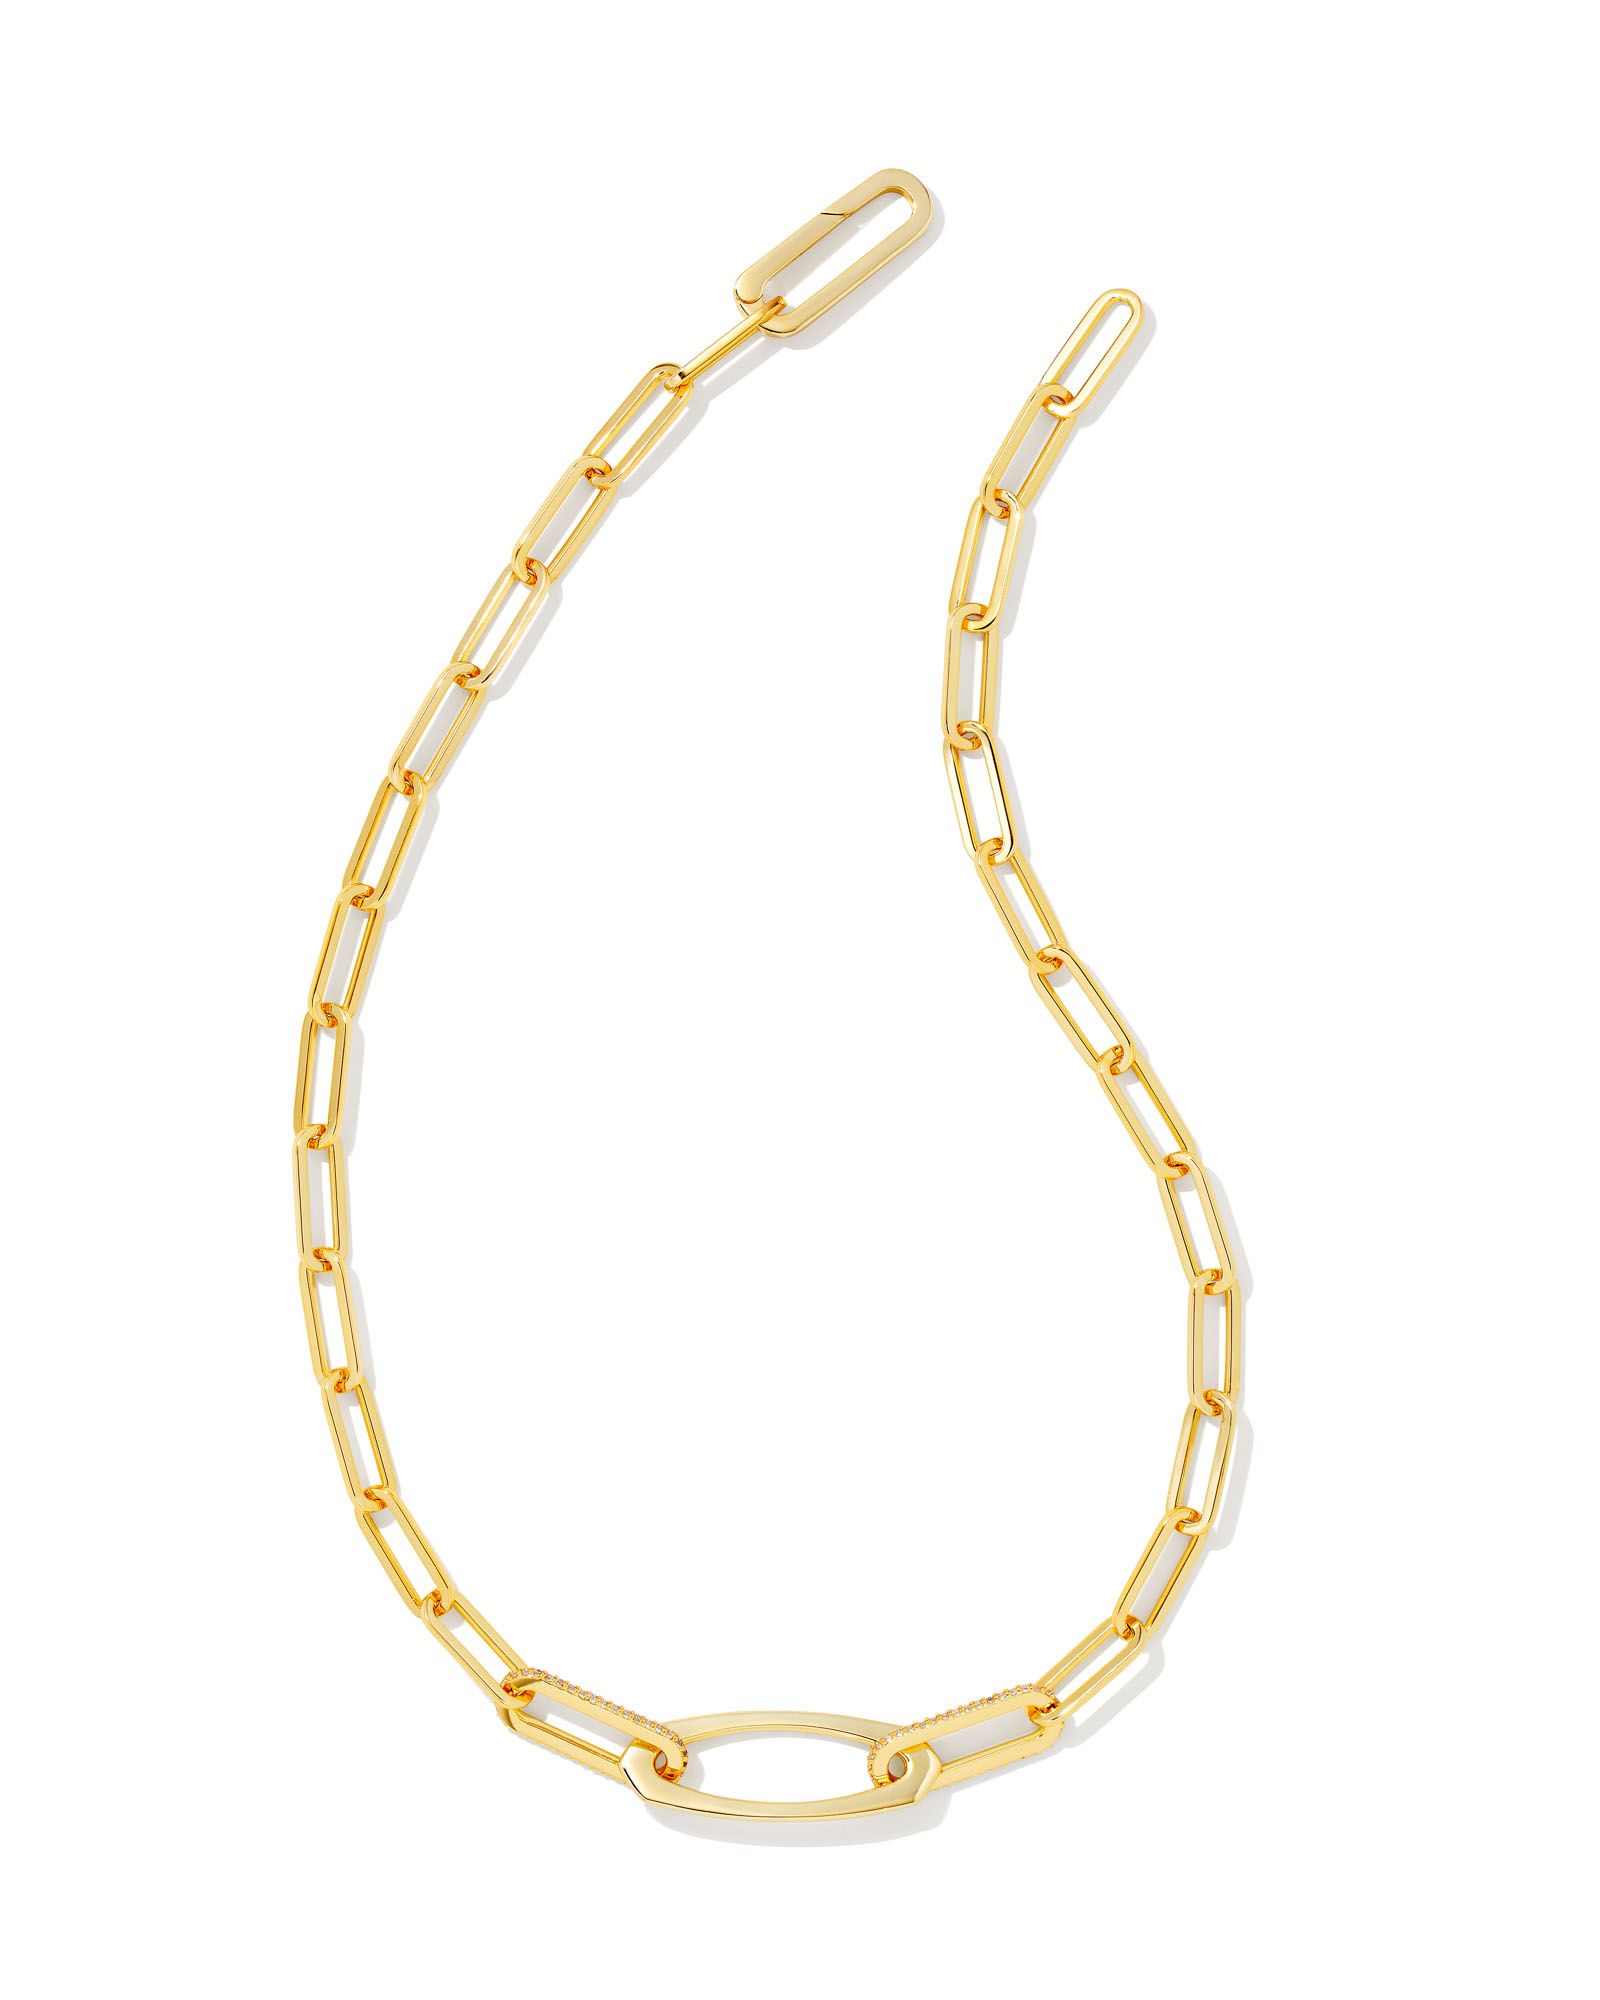 Juliette Gold Strand Necklace in White Crystal